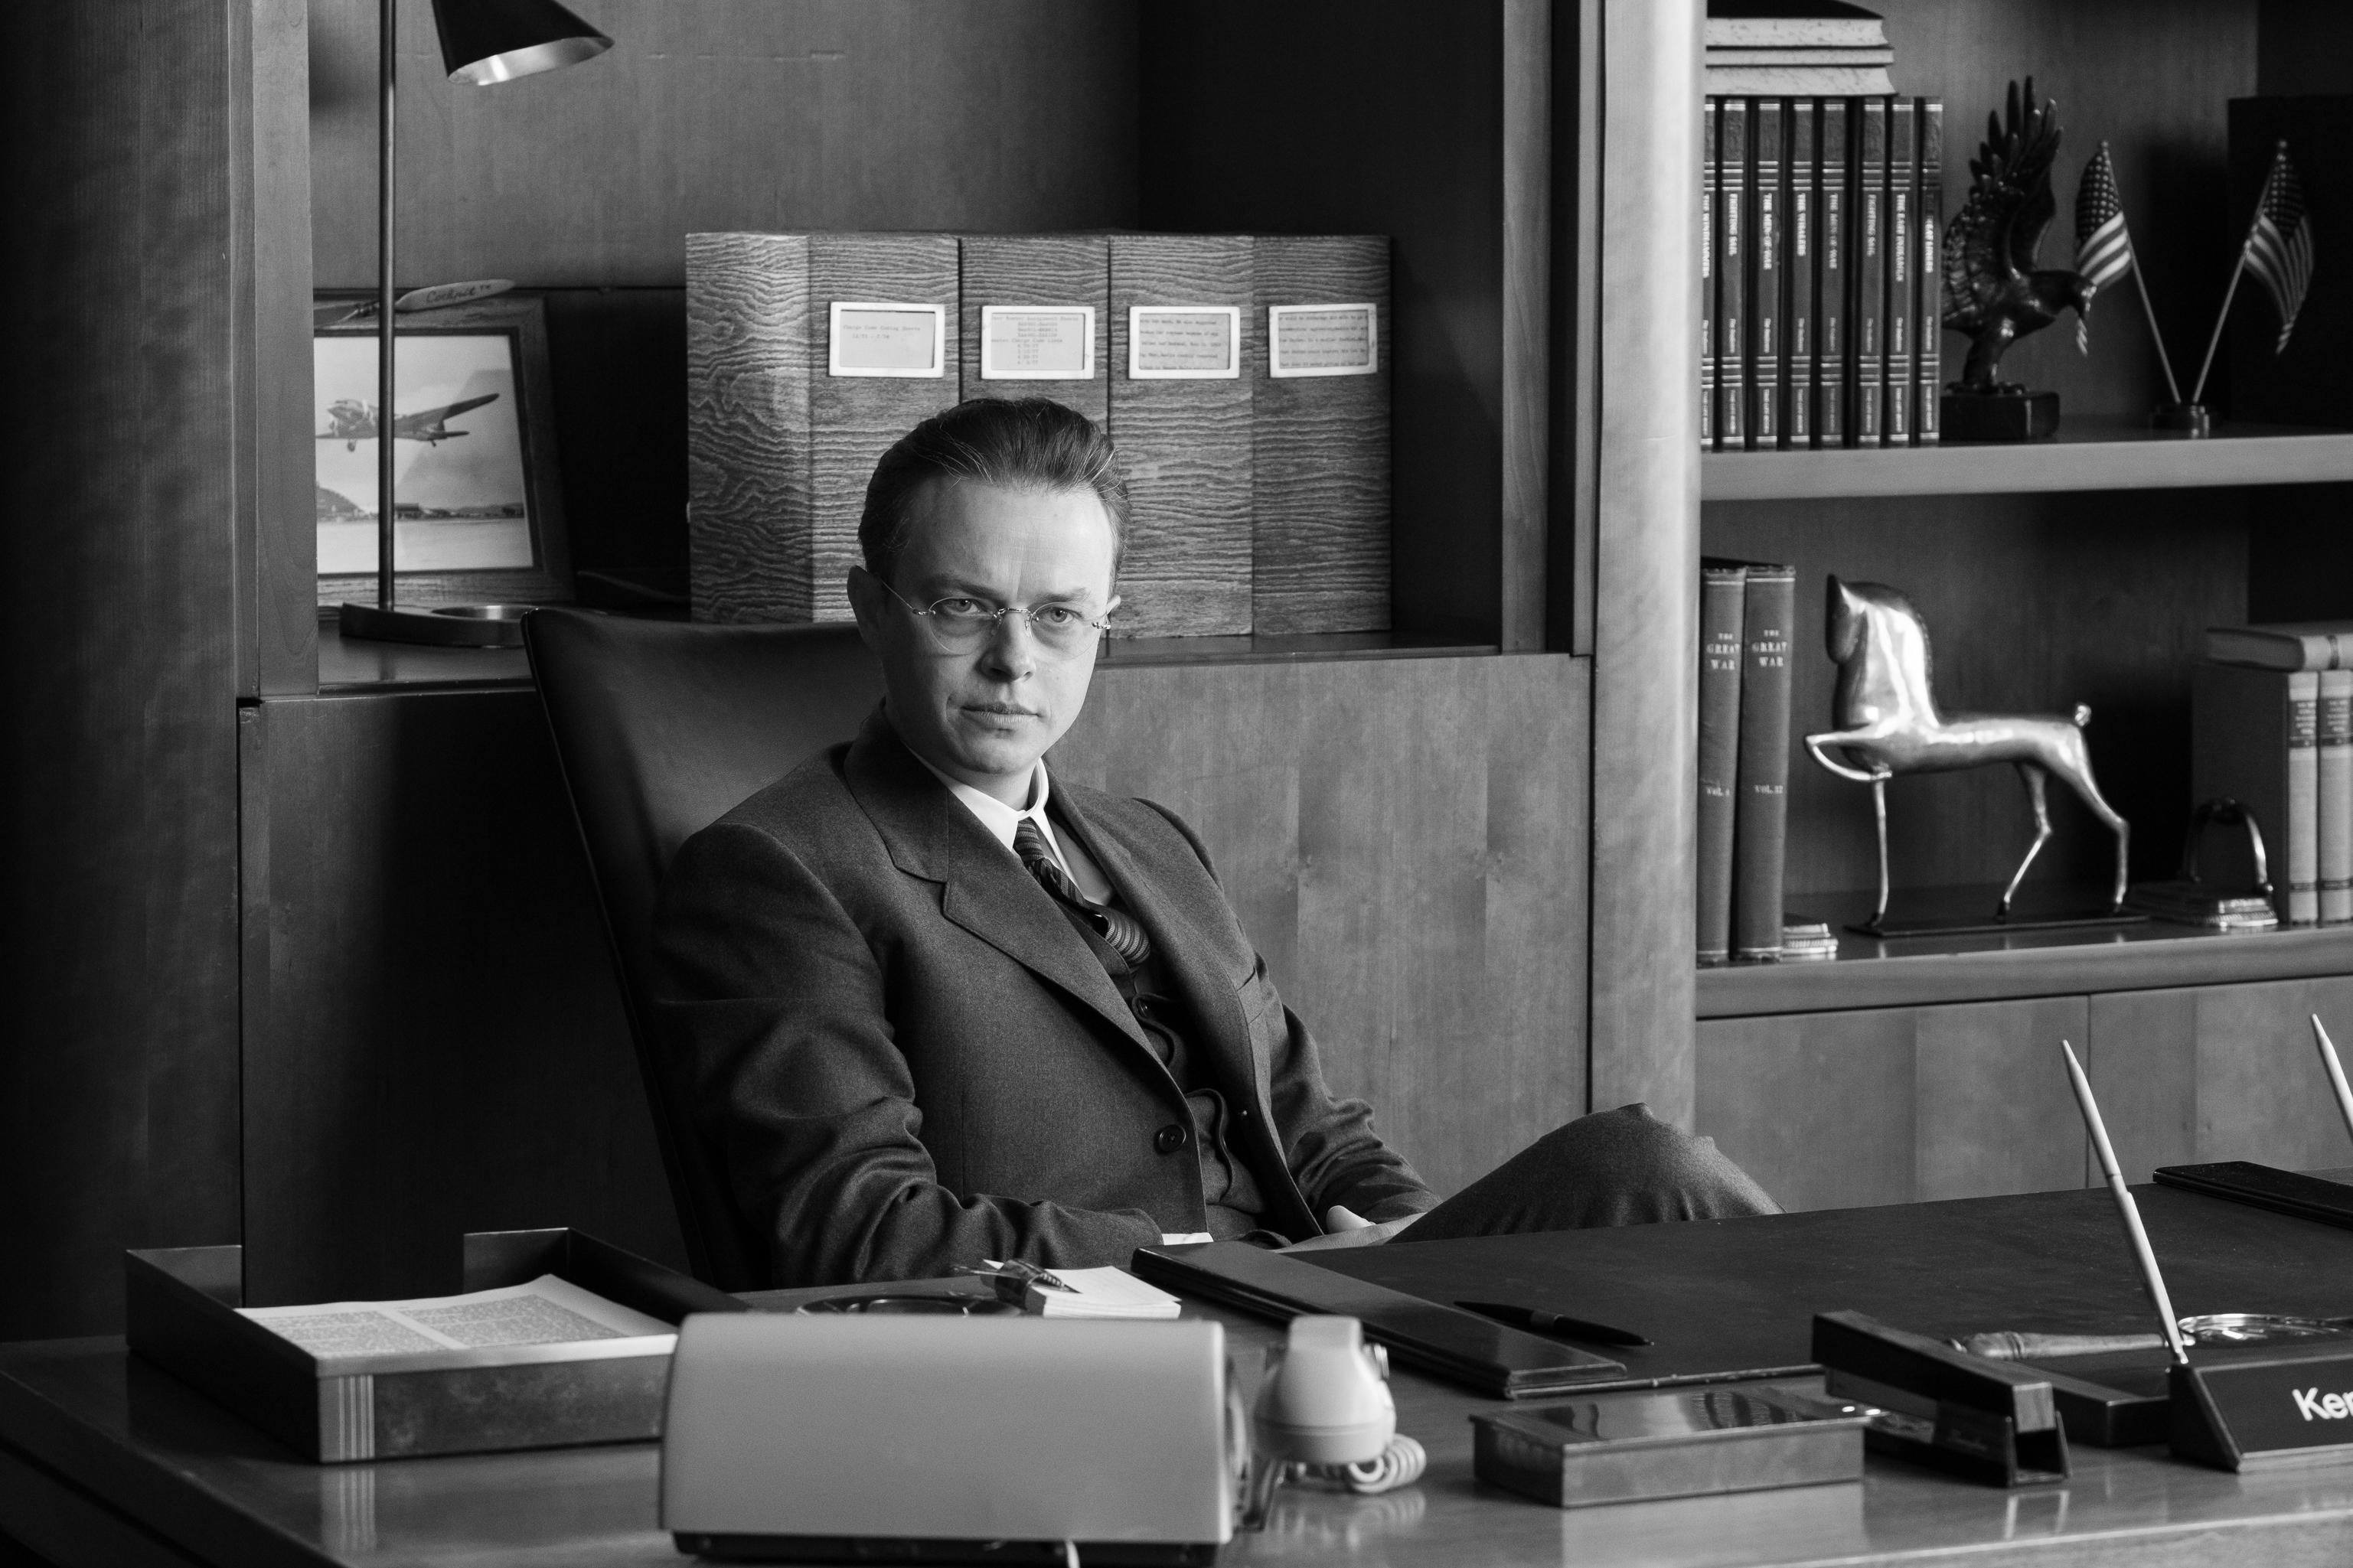 Black and white HD wallpaper featuring a poised man in a suit sitting at a desk, evoking the theme of the film Oppenheimer, for desktop background use.